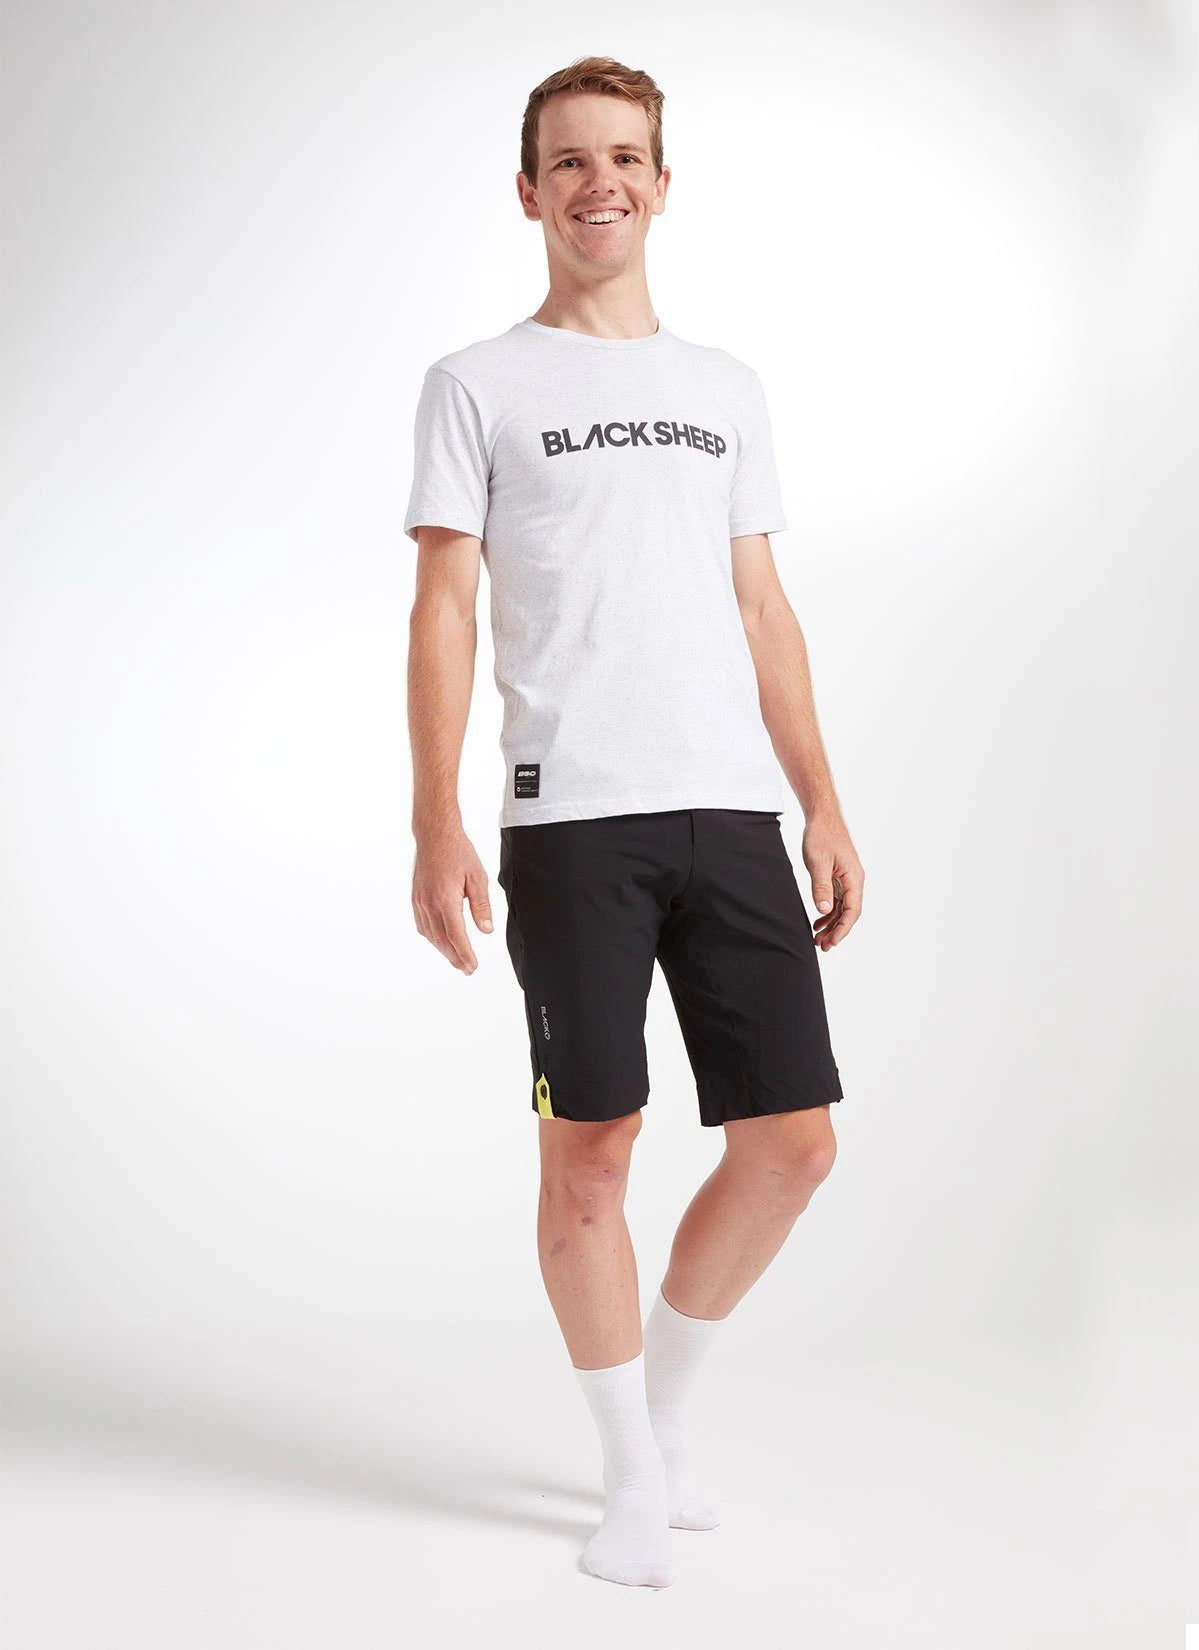 Black Sheep Cycling Men's Adventure ActiveCotton Tee - White Marle | CYCLISM